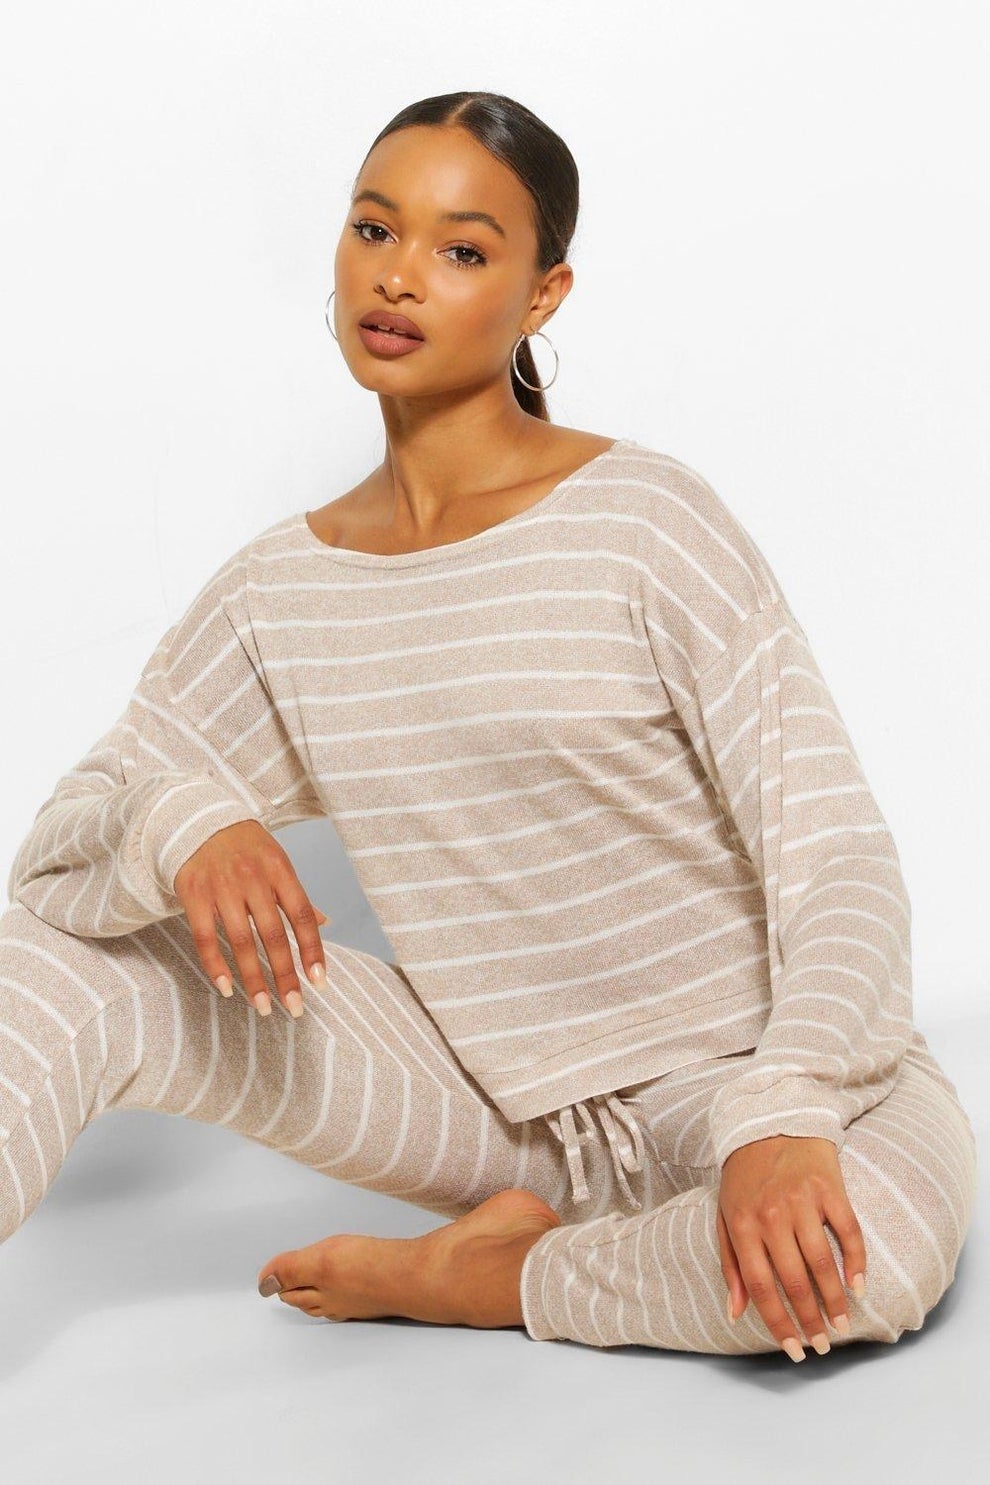 43 Pajamas For Everyone On Your Holiday List